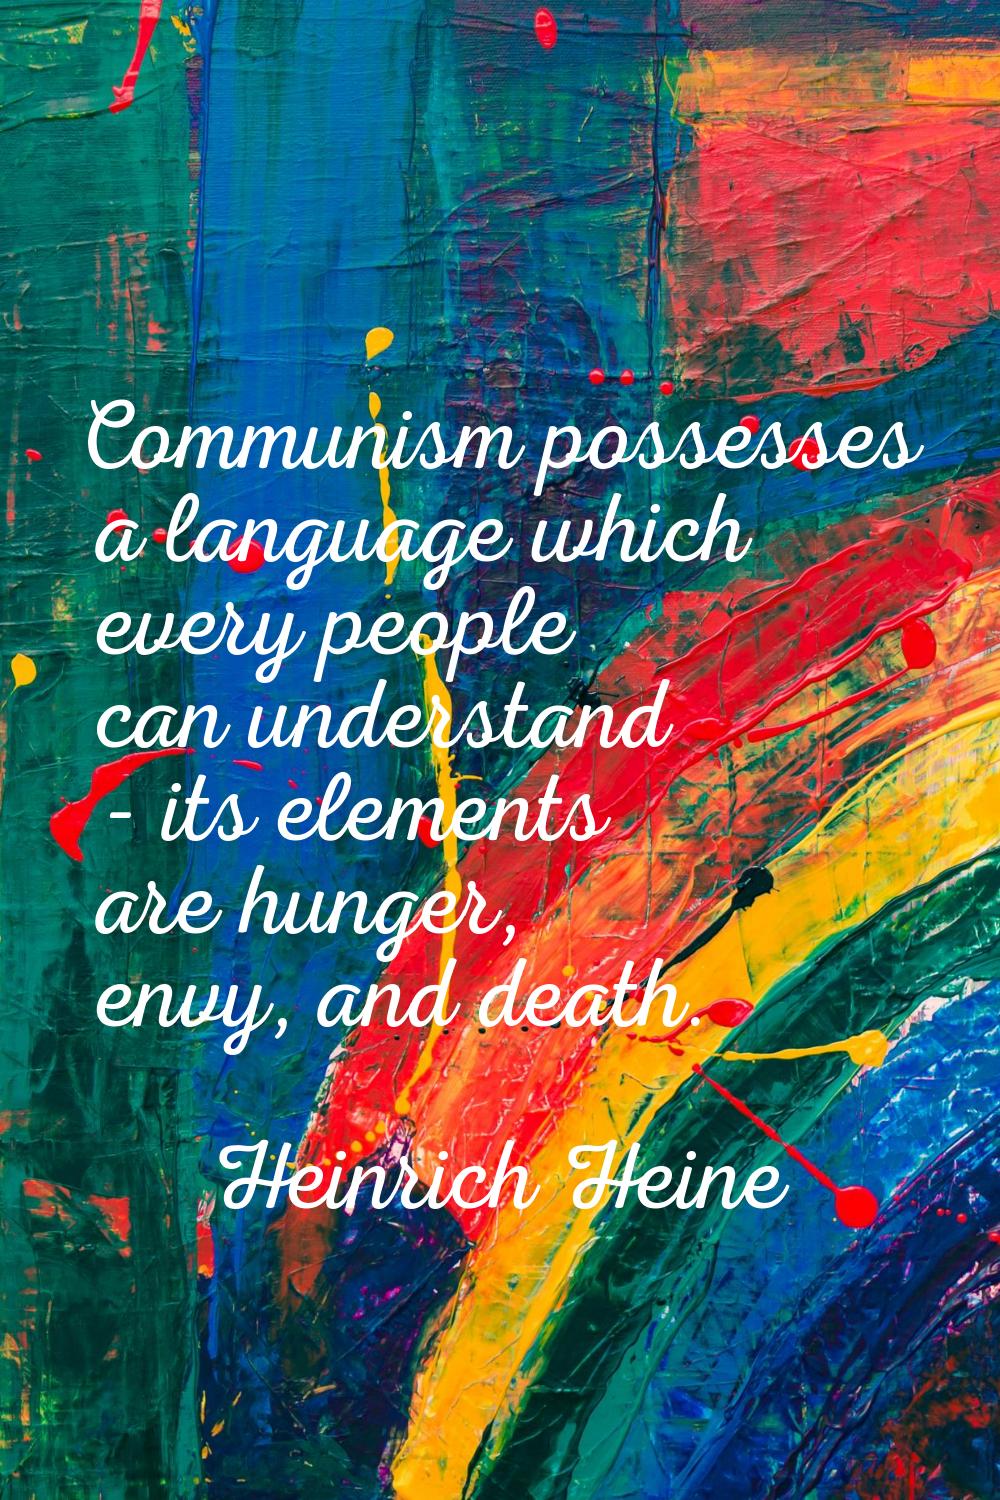 Communism possesses a language which every people can understand - its elements are hunger, envy, a